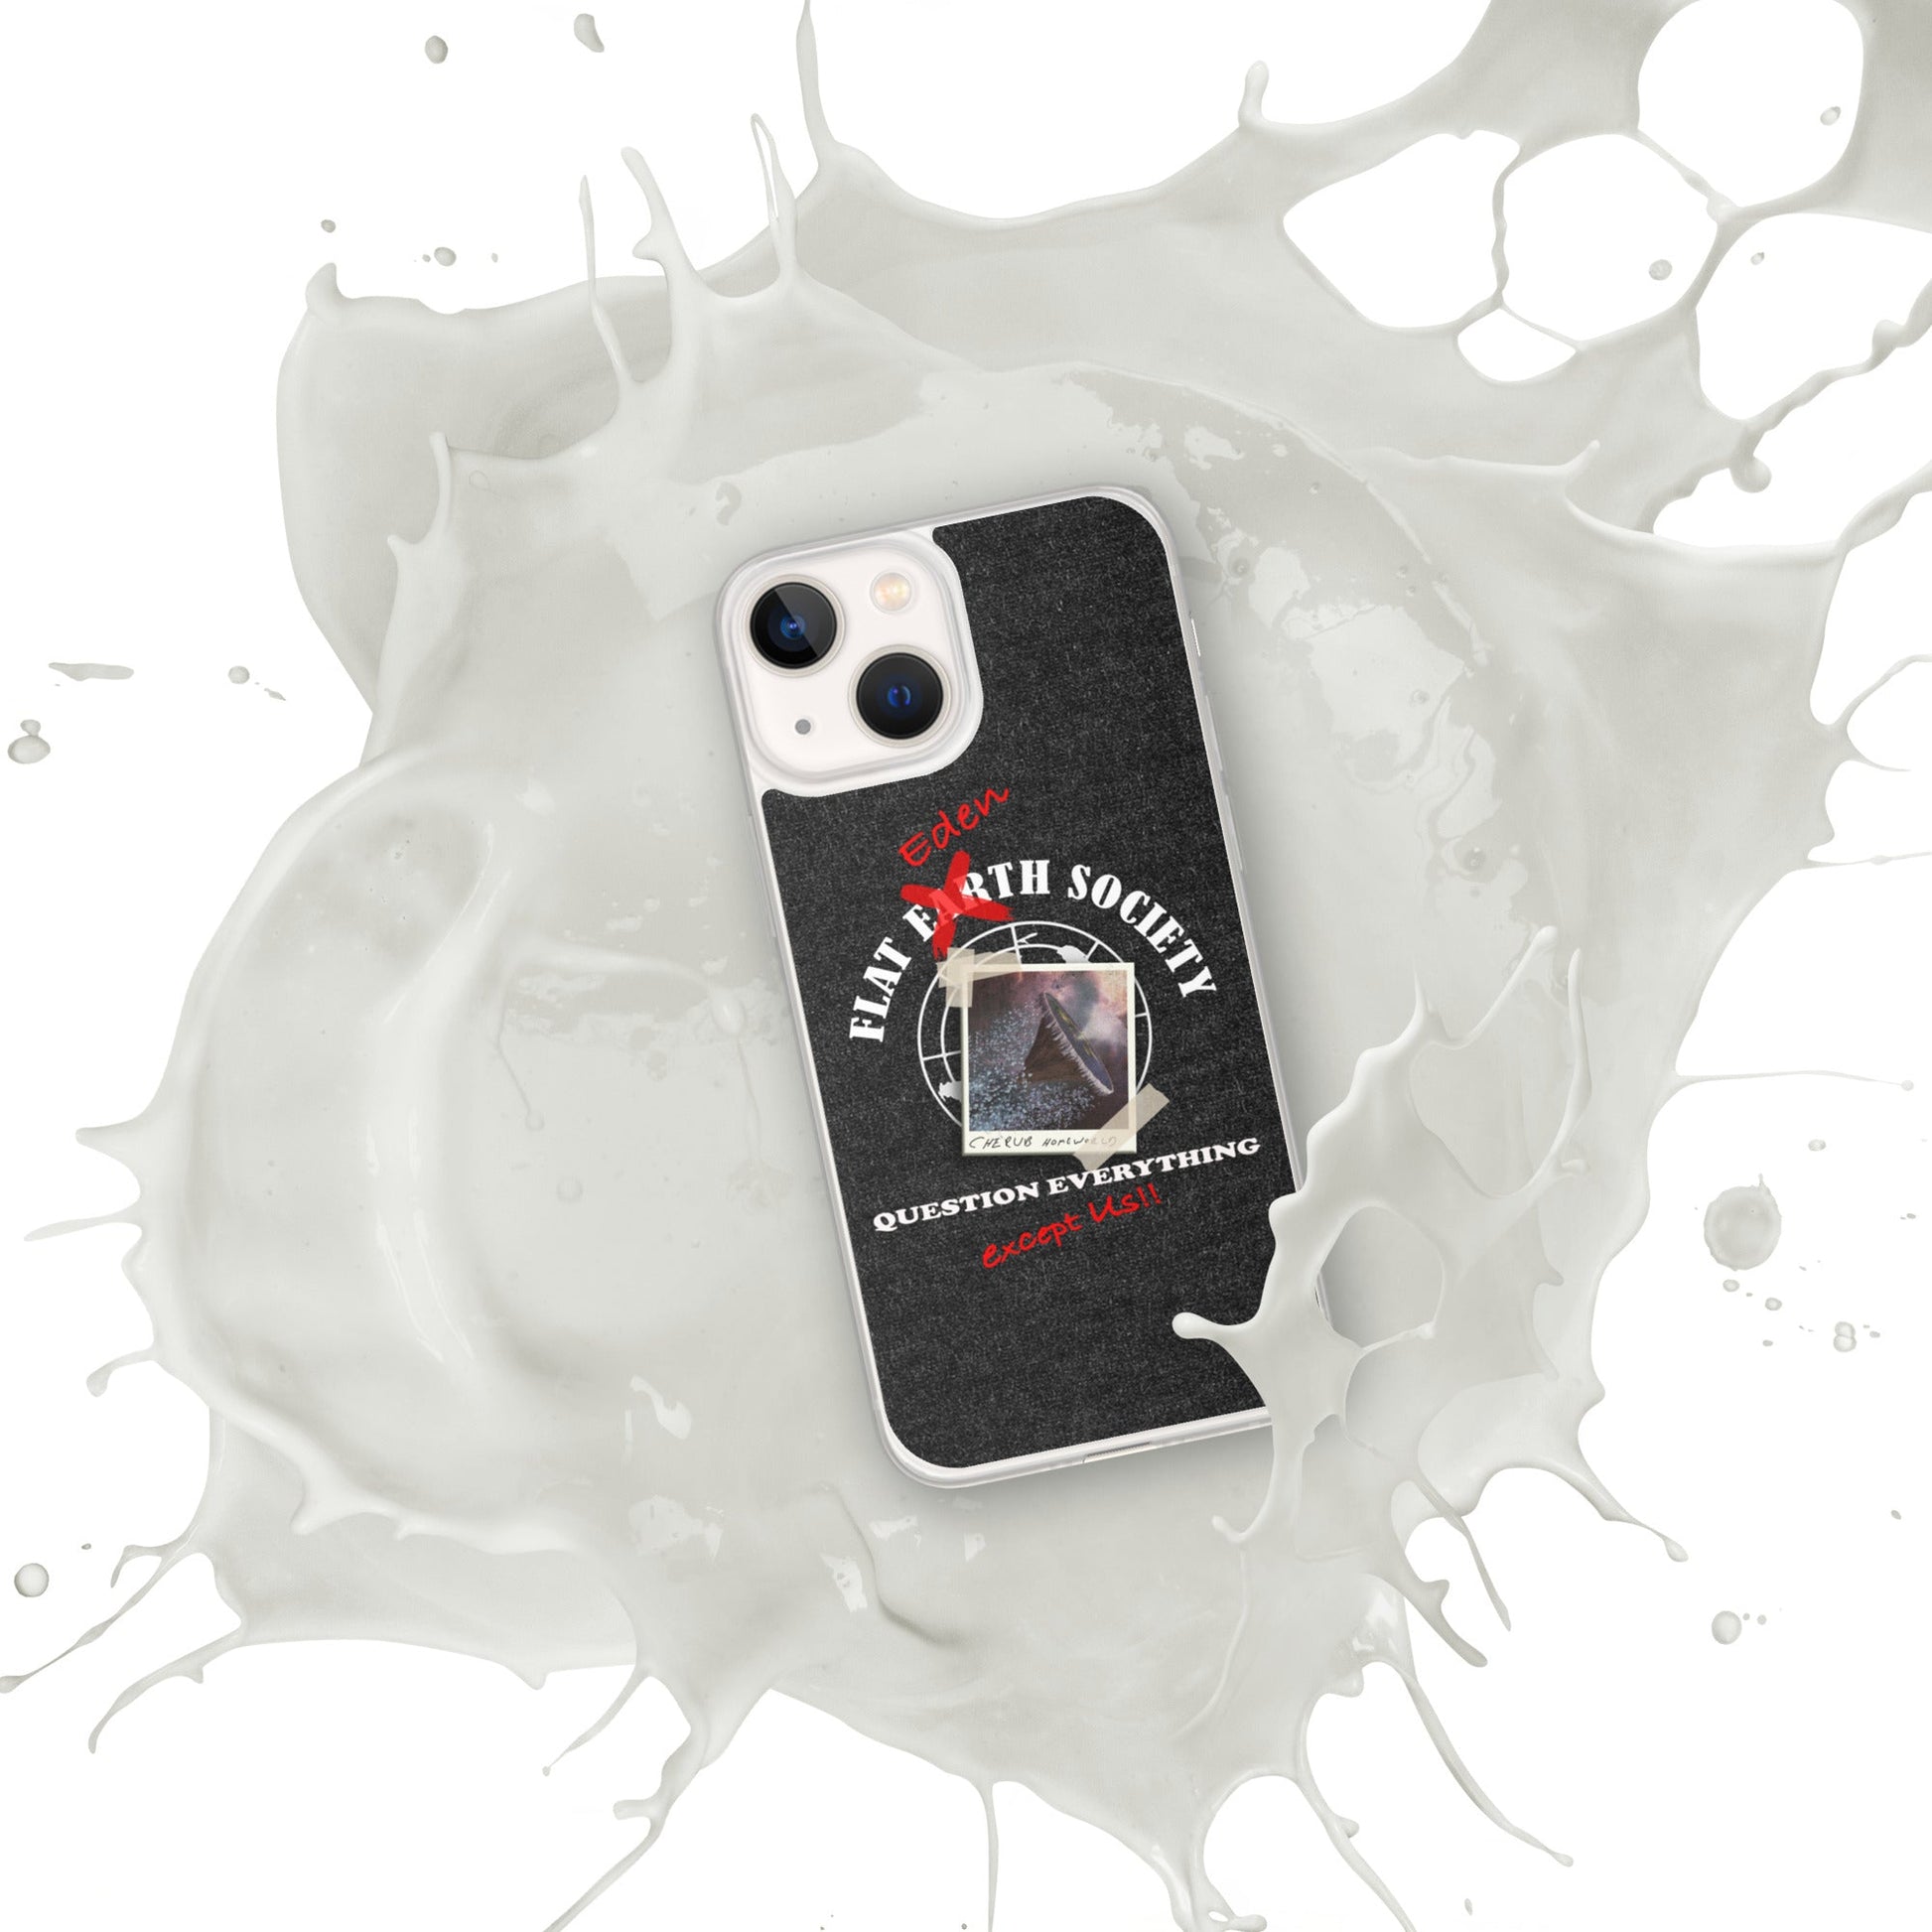 iPhone Case | Intergalactic Space Force 2 | Flat Eden Society - Spectral Ink Shop - Mobile Phone Cases -9780728_13428